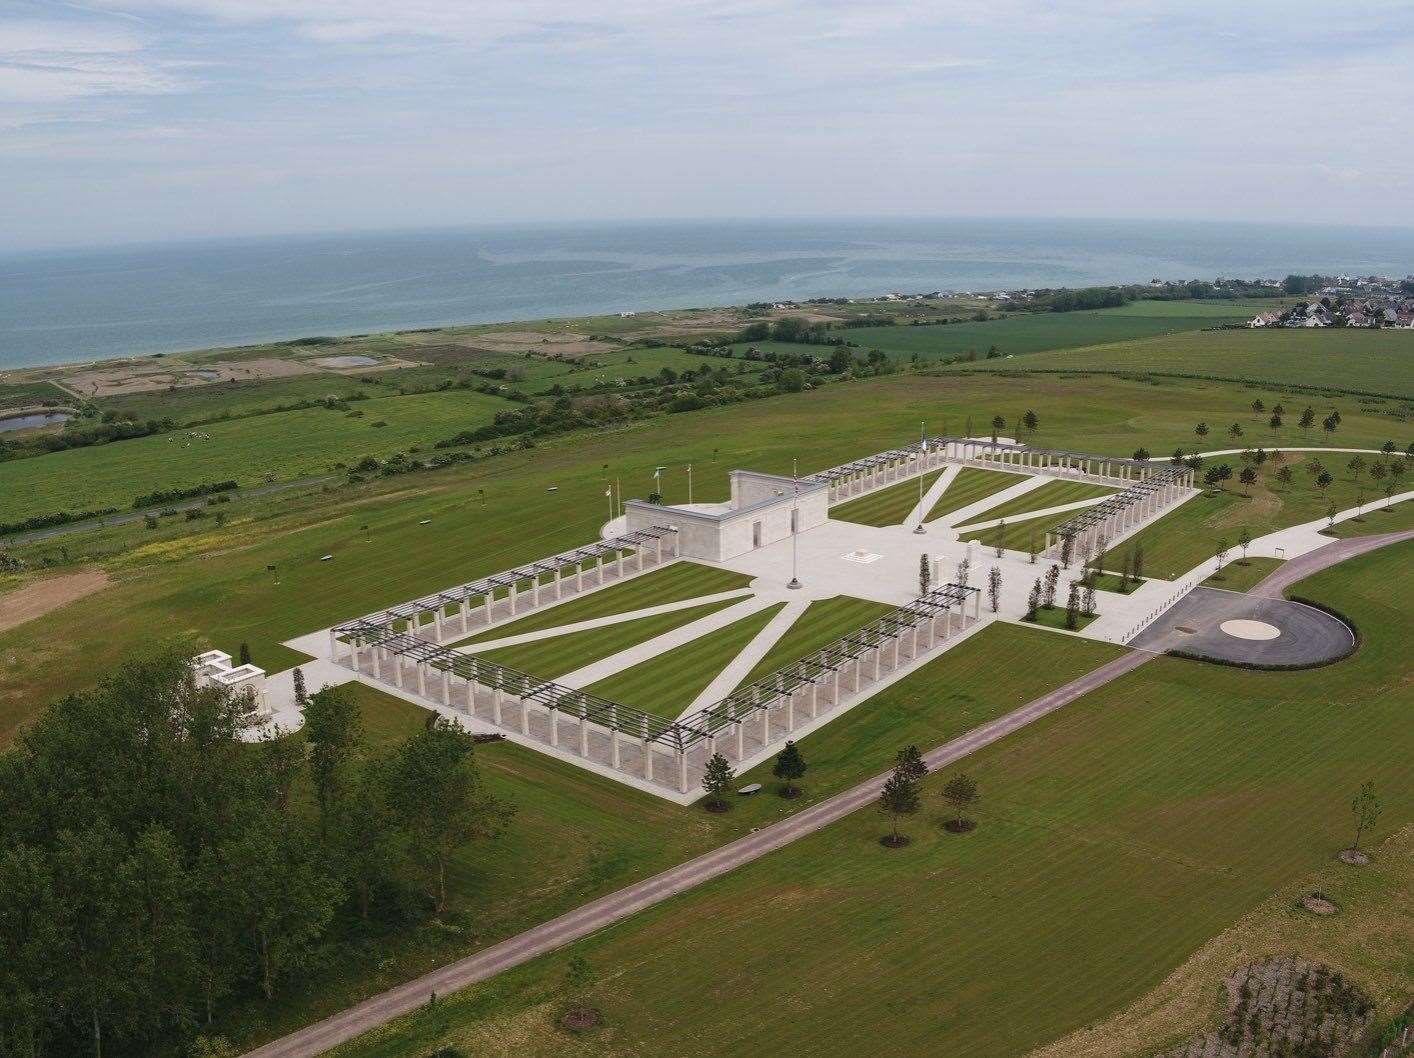 The Normandy Memorial in France